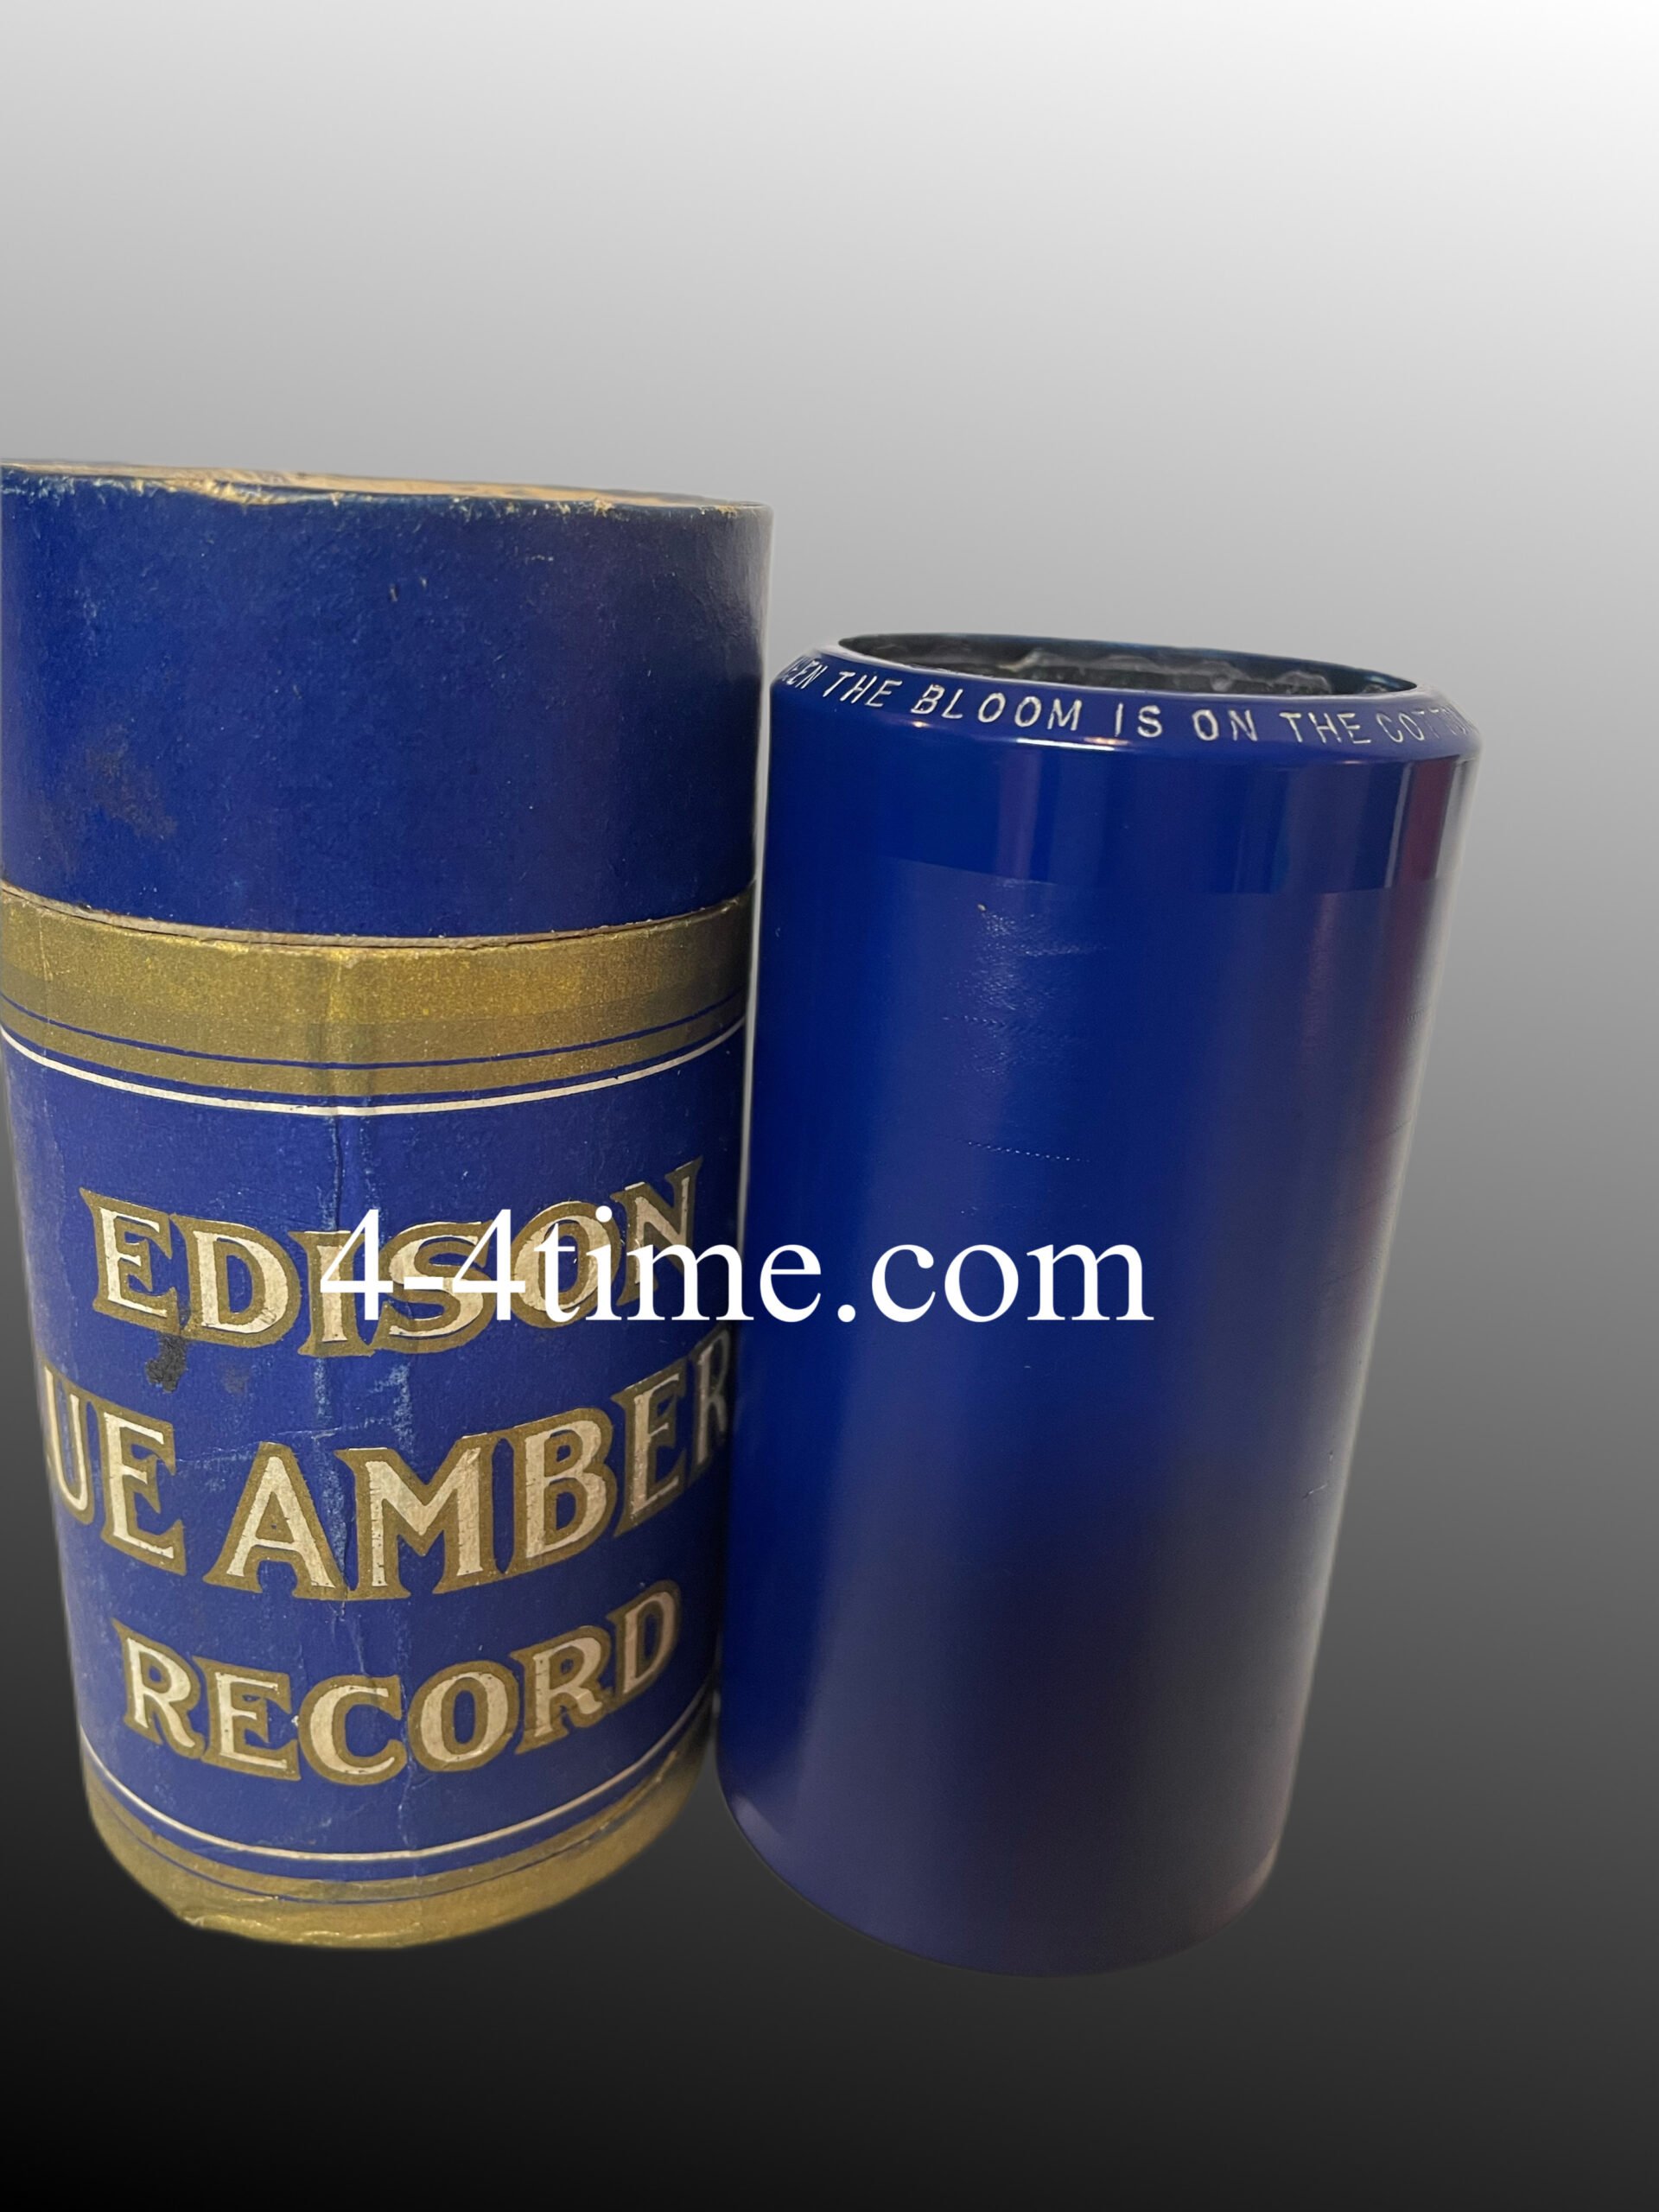 Edison 4 min. Cylinder…”Somewhere a Voice is Calling” (British Series)